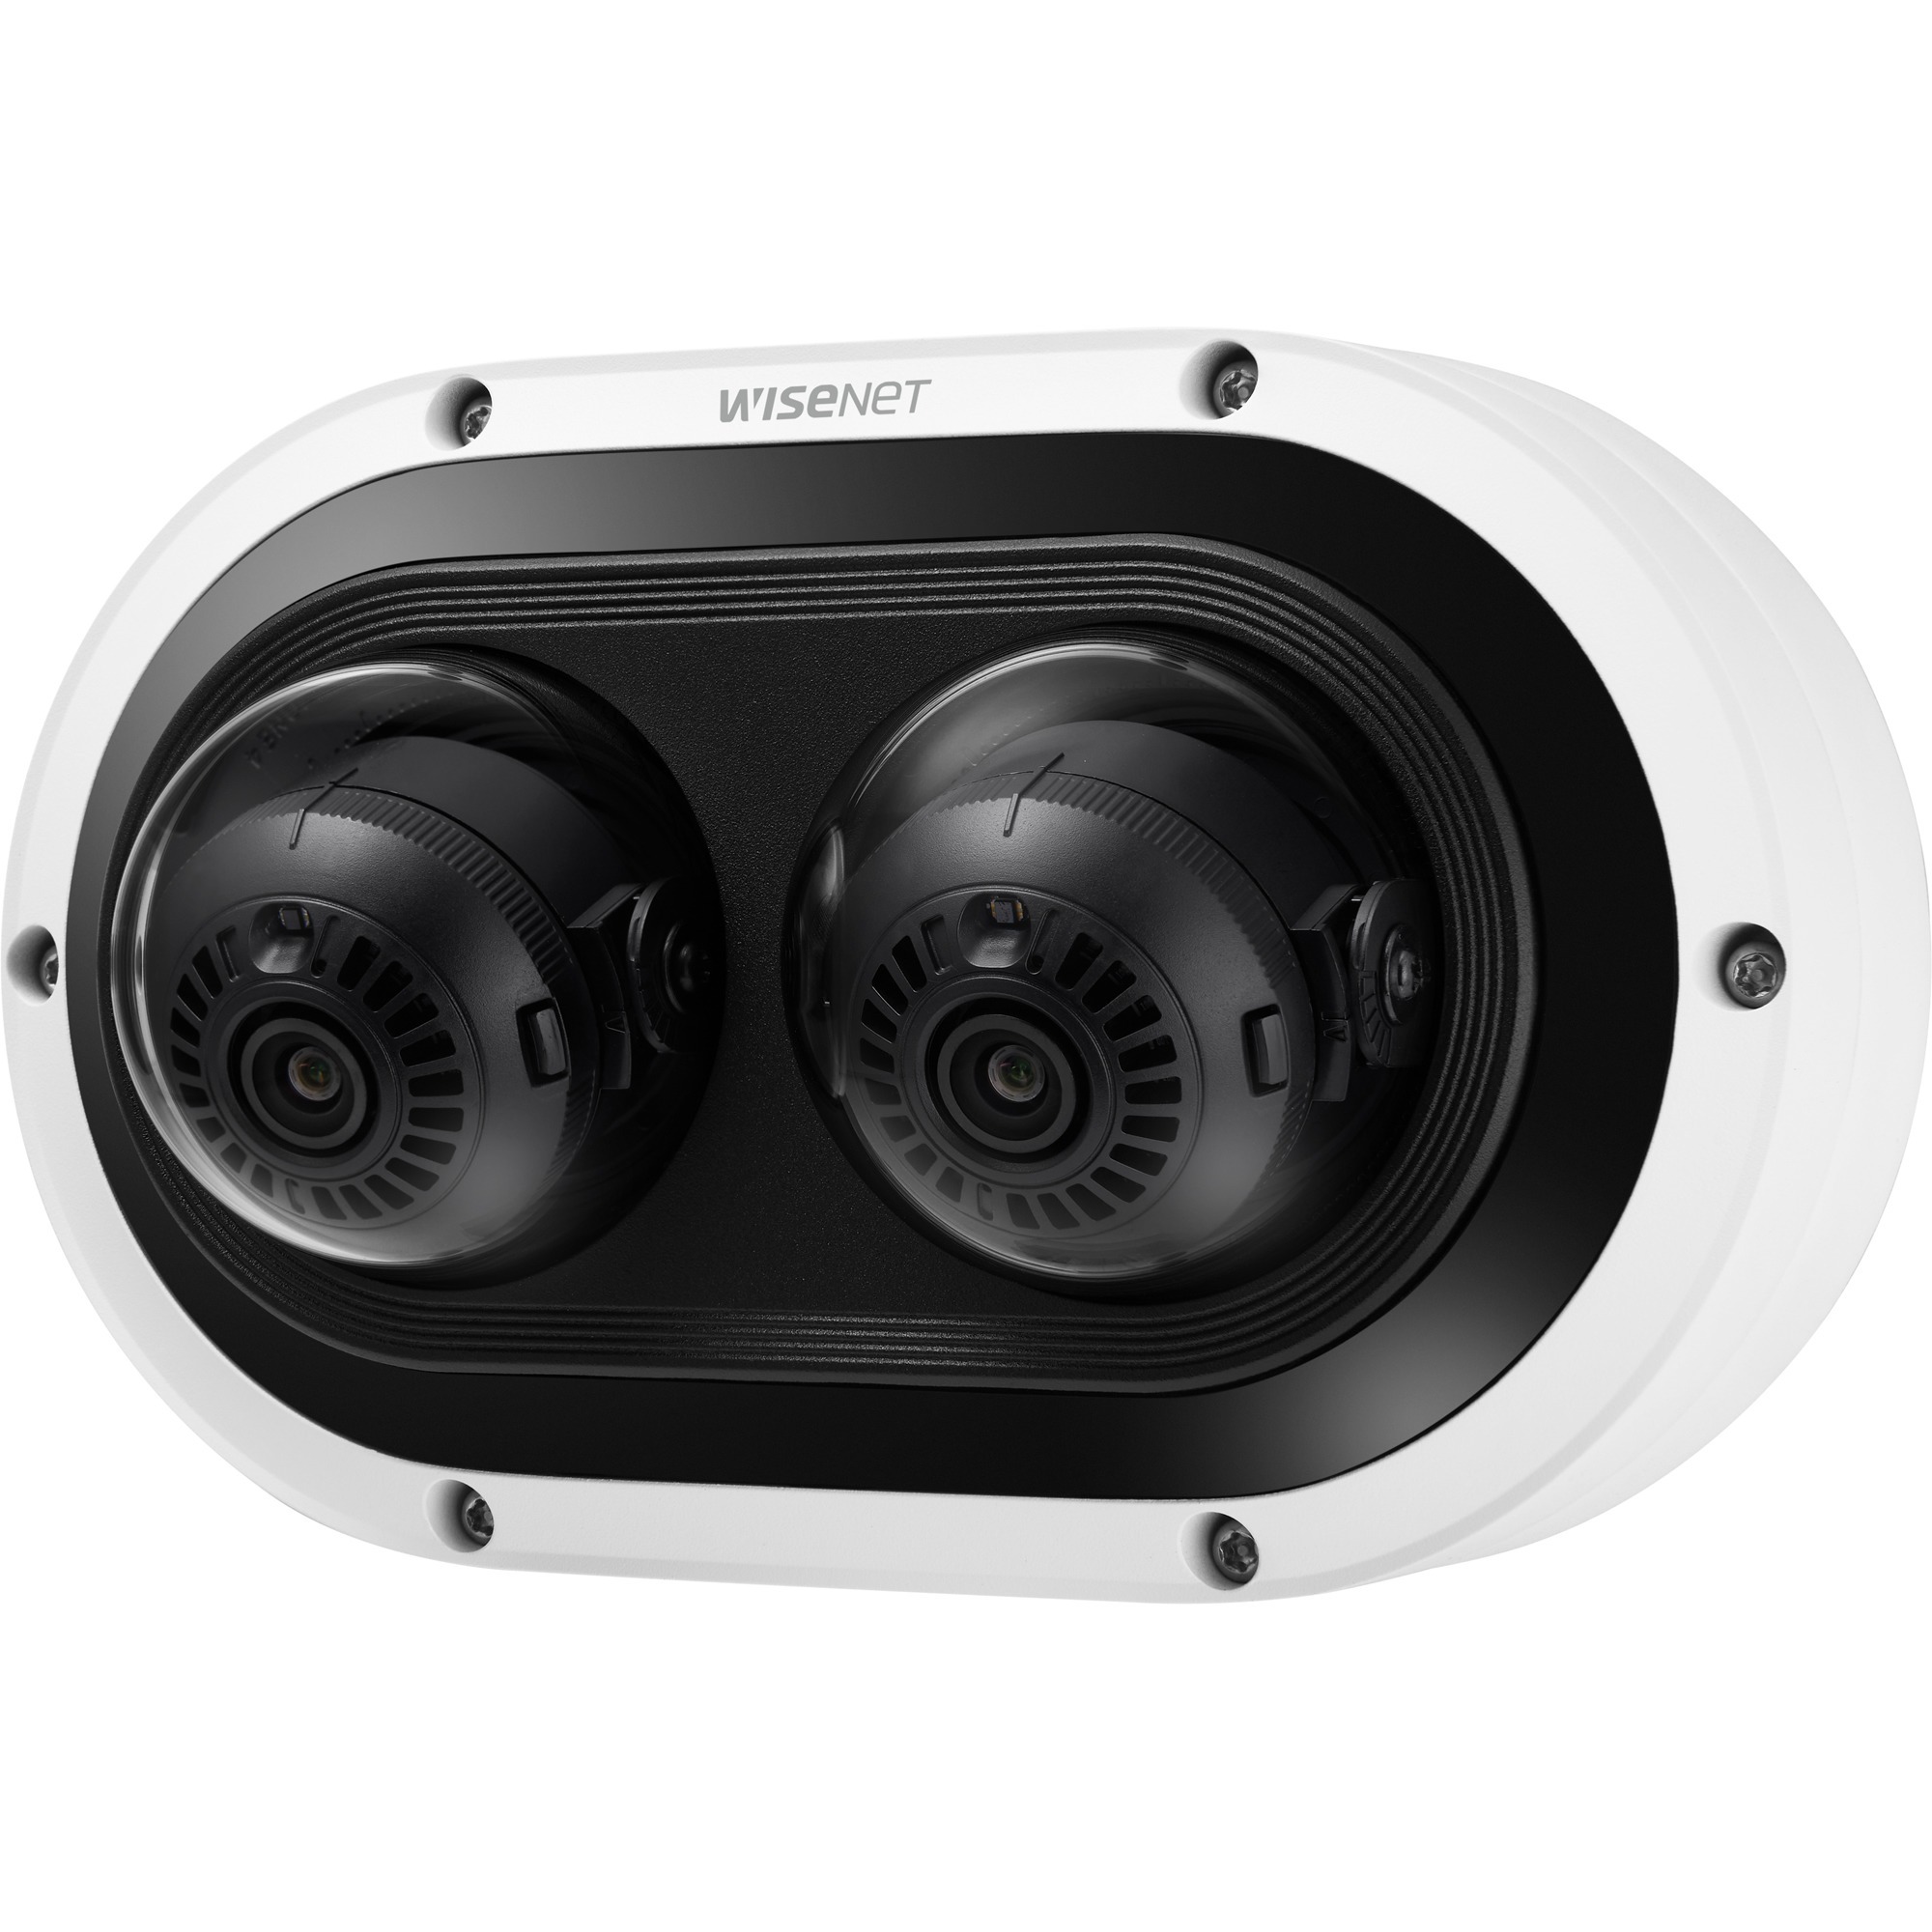 Wisenet PNM-12082RVD 6 Megapixel Outdoor Network Camera - Color - Dome - White - TAA Compliant